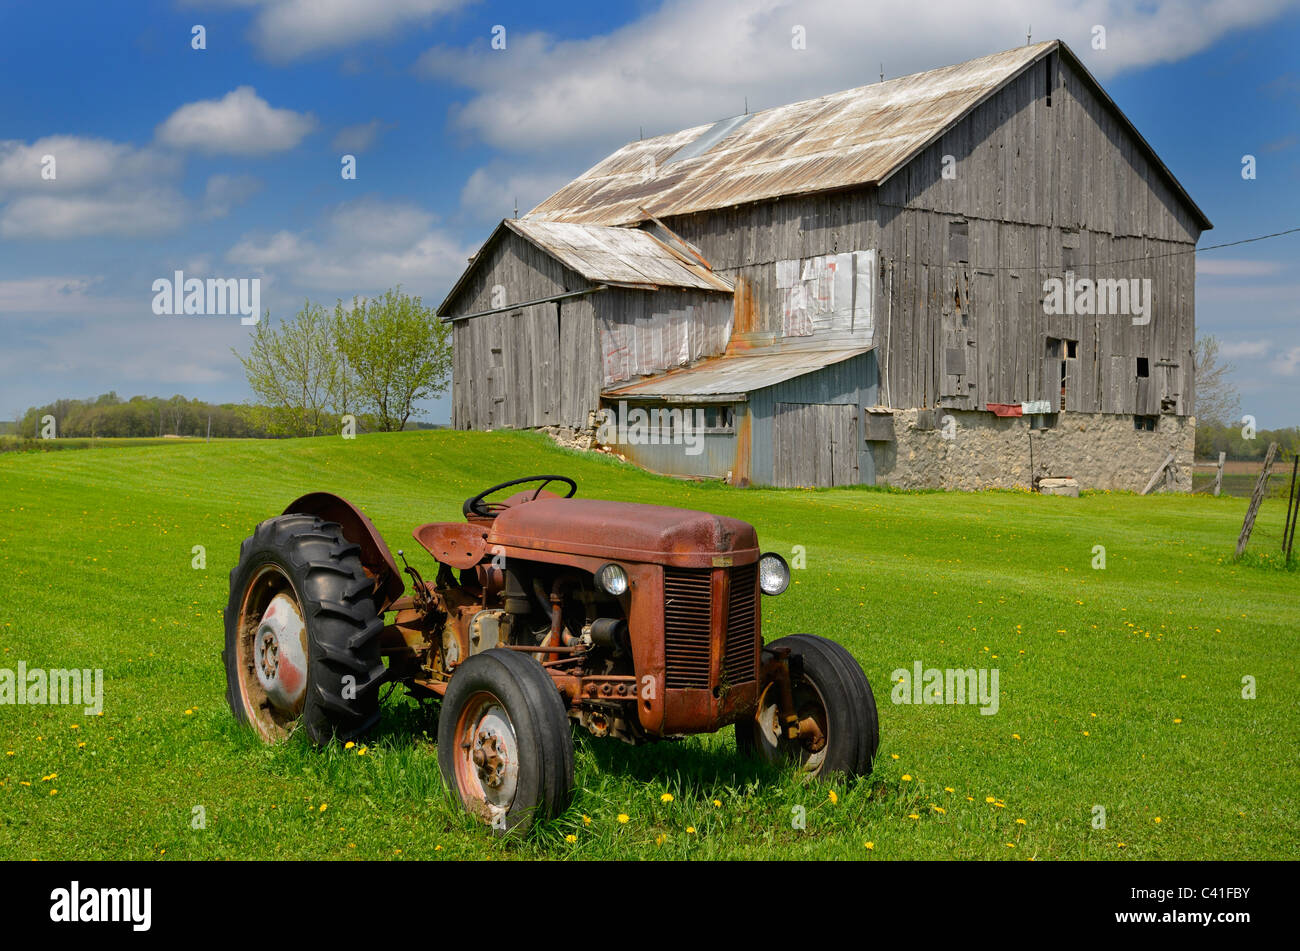 Rusted tractor and old barn in grass field and blue sky in rural Ontario Canada Stock Photo